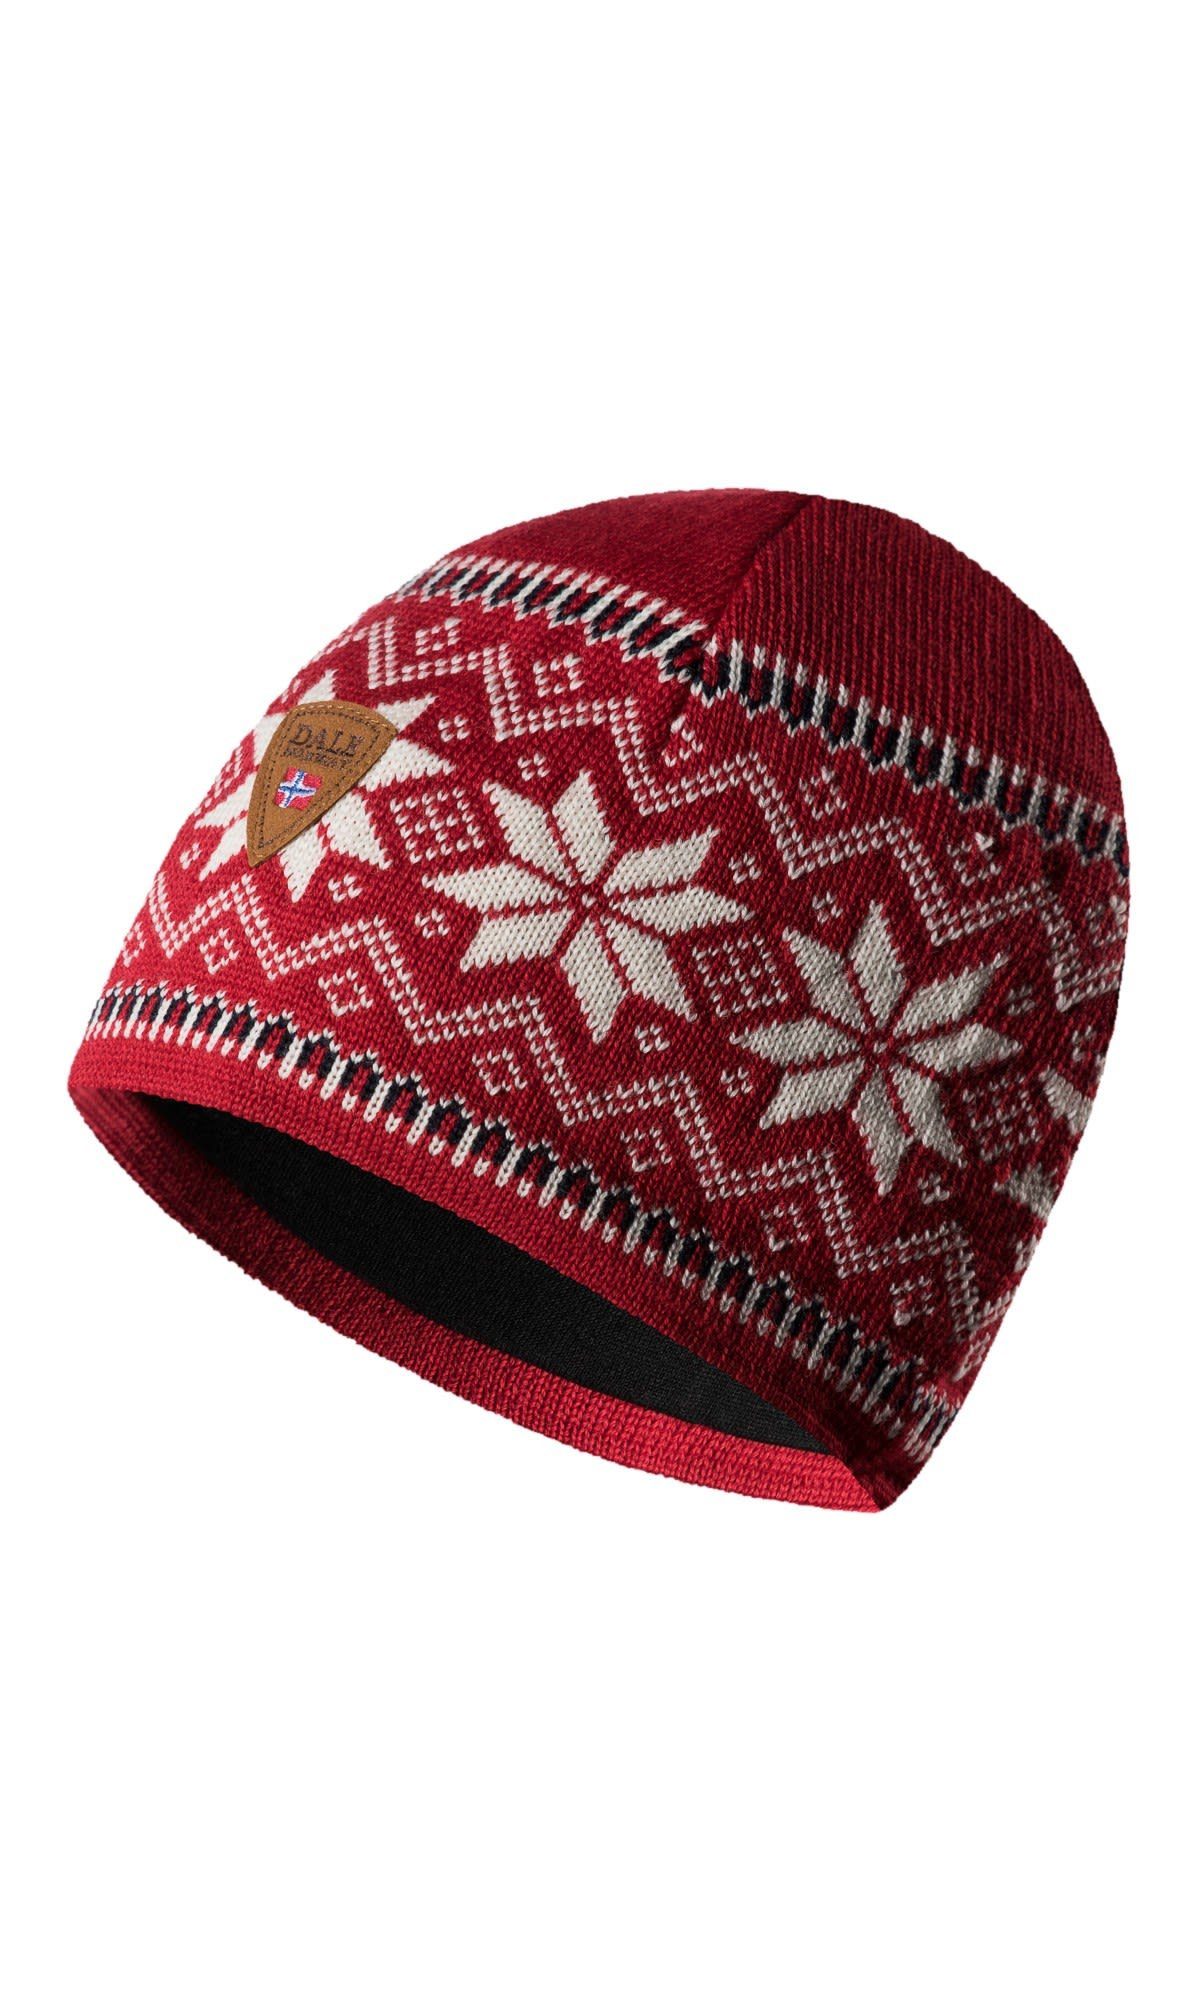 Dale of Norway Beanie Offwhite Navy Of - Hat Red Garmisch Norway - Accessoires Dale